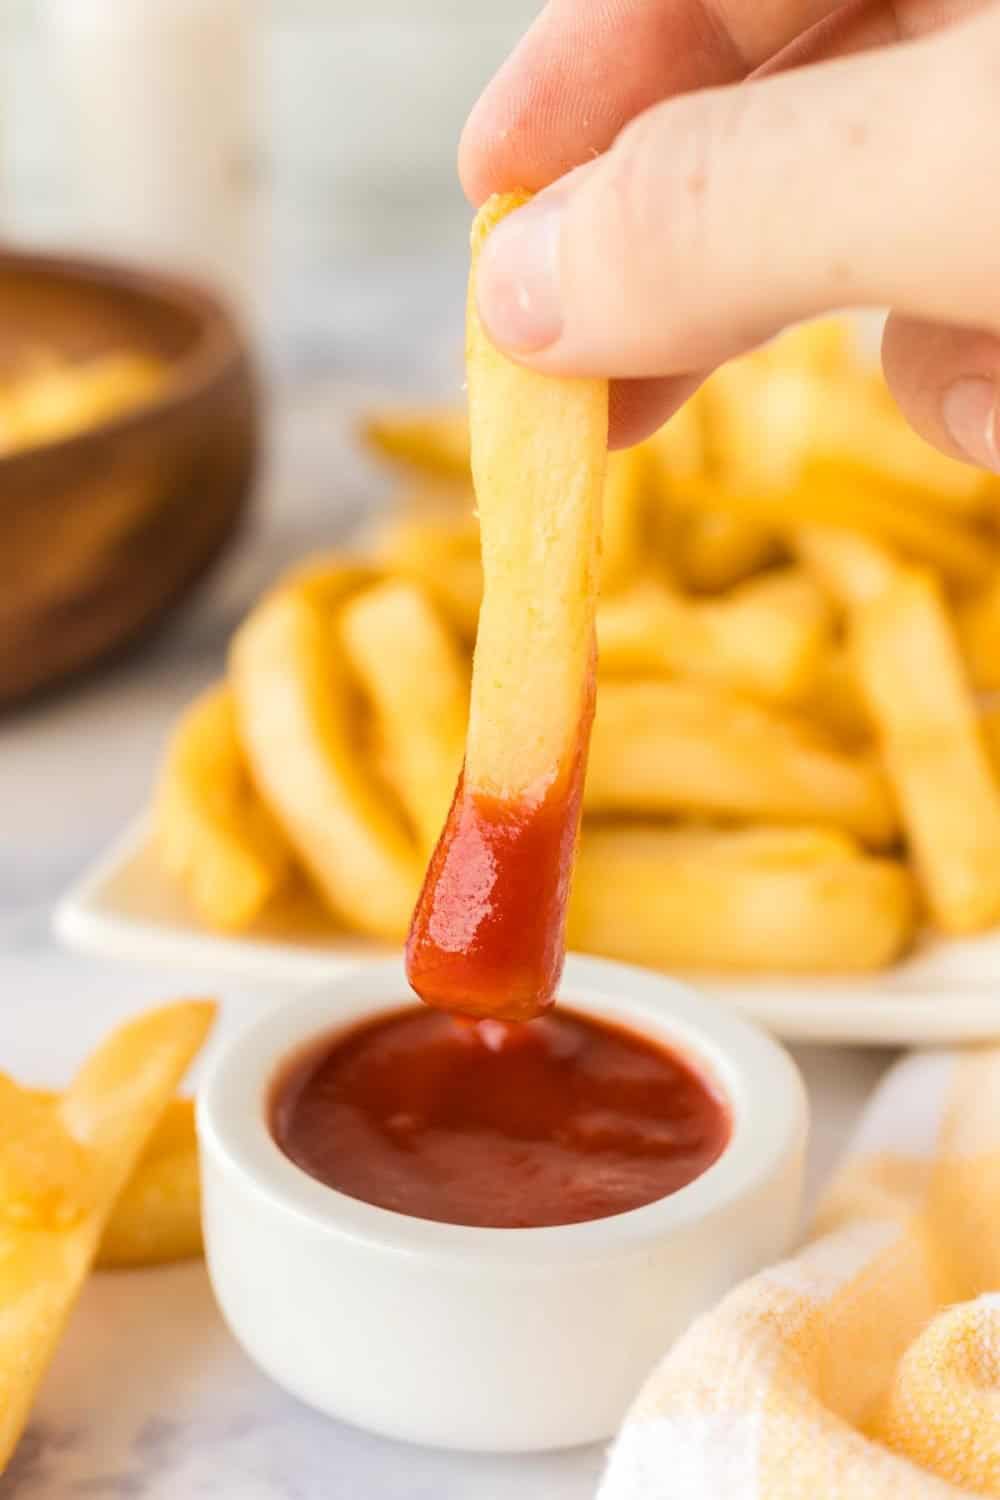 Hand dipping a fry into ketchup next to a long rectangle plate of air fryer french fries.